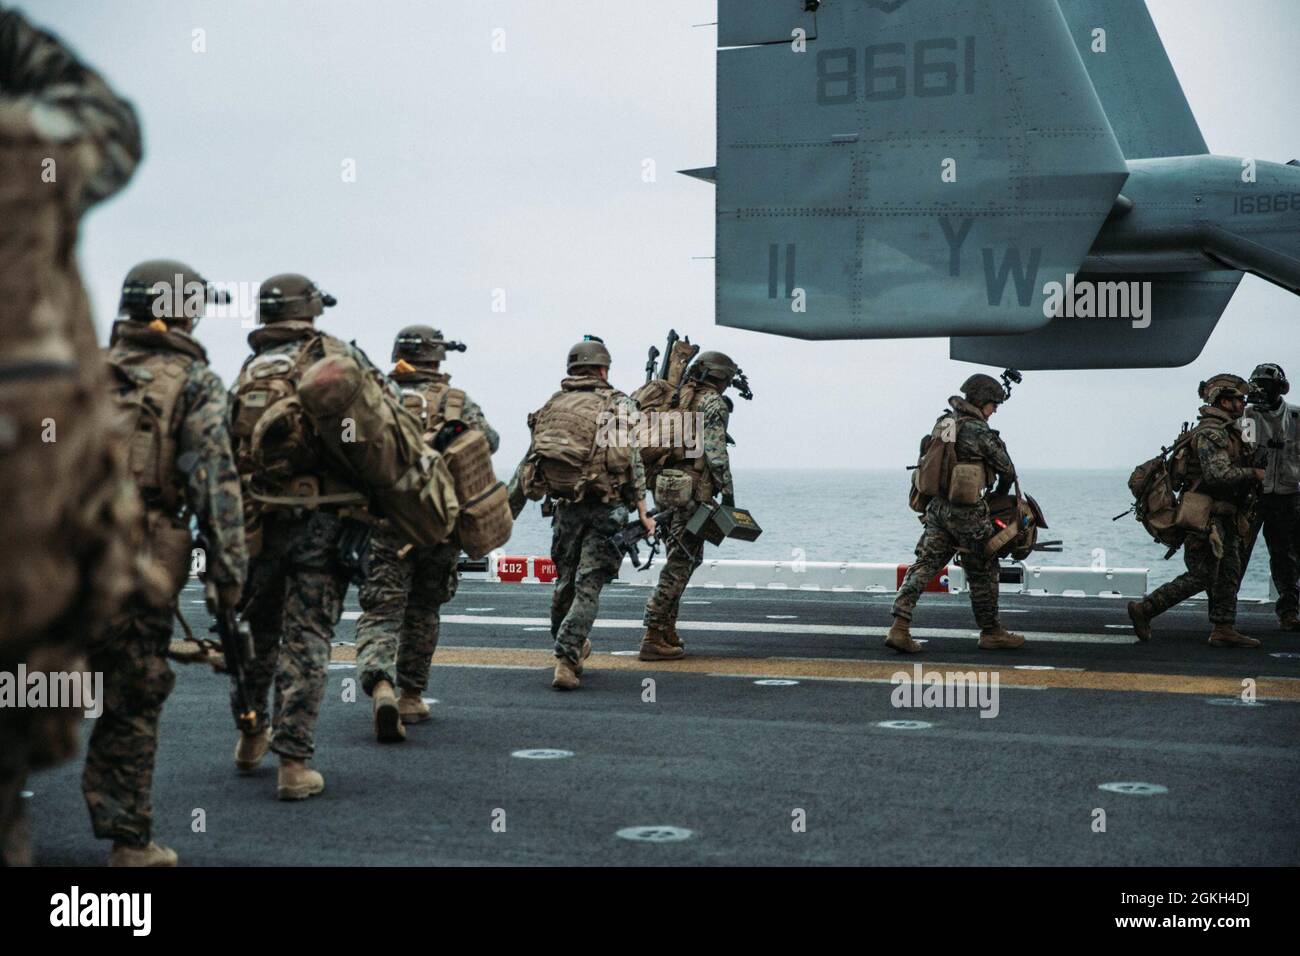 PACIFIC OCEAN (April 20, 2021) U.S. Marines with Bravo Company, Battalion Landing Team 1/1, 11th Marine Expeditionary Unit (MEU), load onto an MV-22B Osprey aboard amphibious assault ship USS Essex (LHD 2) during a tactical recovery of aircraft and personnel exercise, April 20. Sailors and Marines of the Essex Amphibious Ready Group (ARG) and the 11th MEU are conducting routine training off the coast of southern California. Together, the 11th MEU, Amphibious Squadron (PHIBRON) 1, and ships are designated as an ARG. Stock Photo